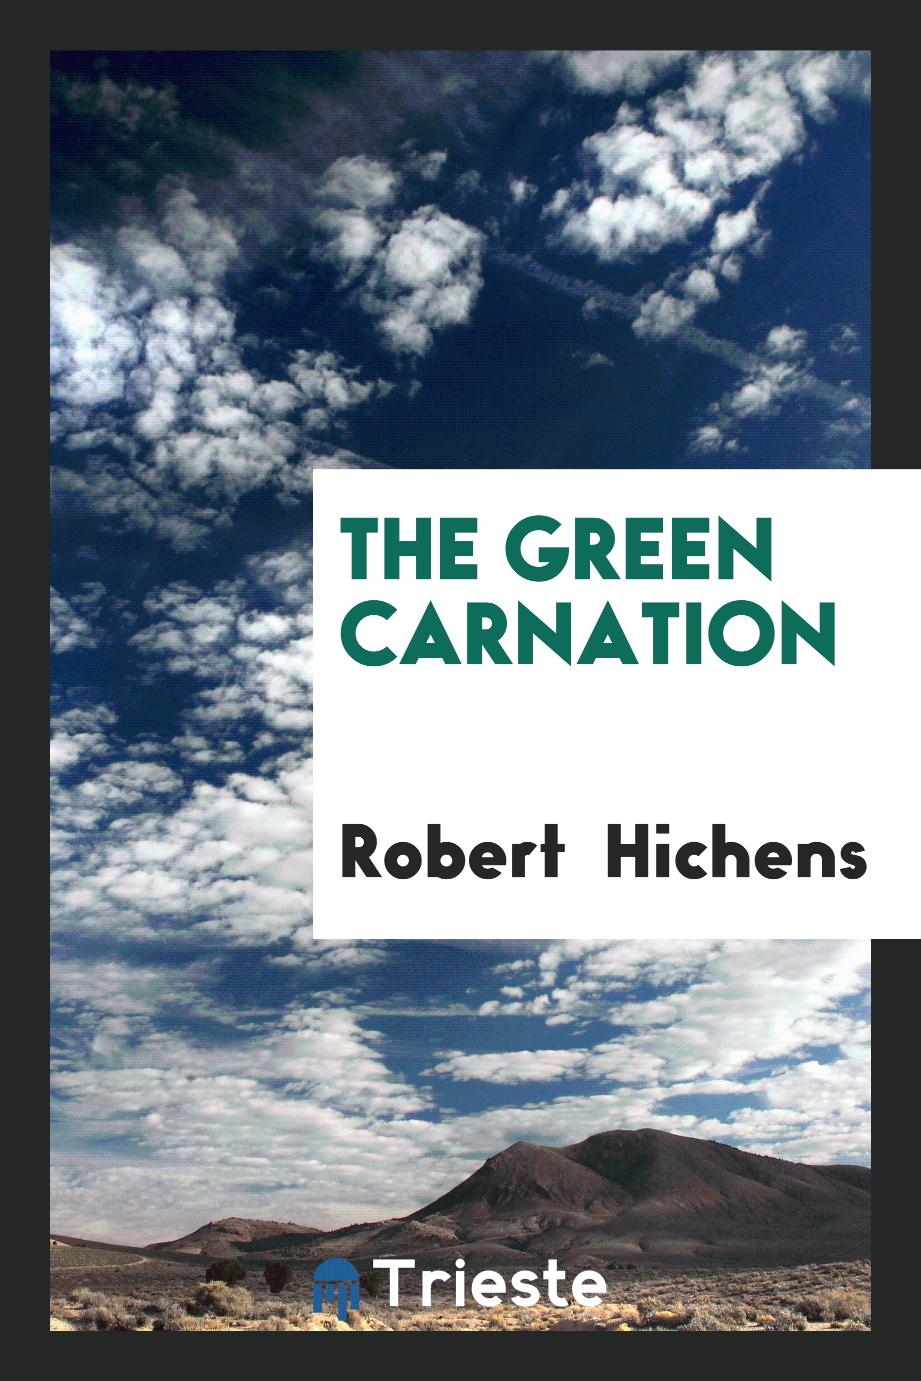 The green carnation